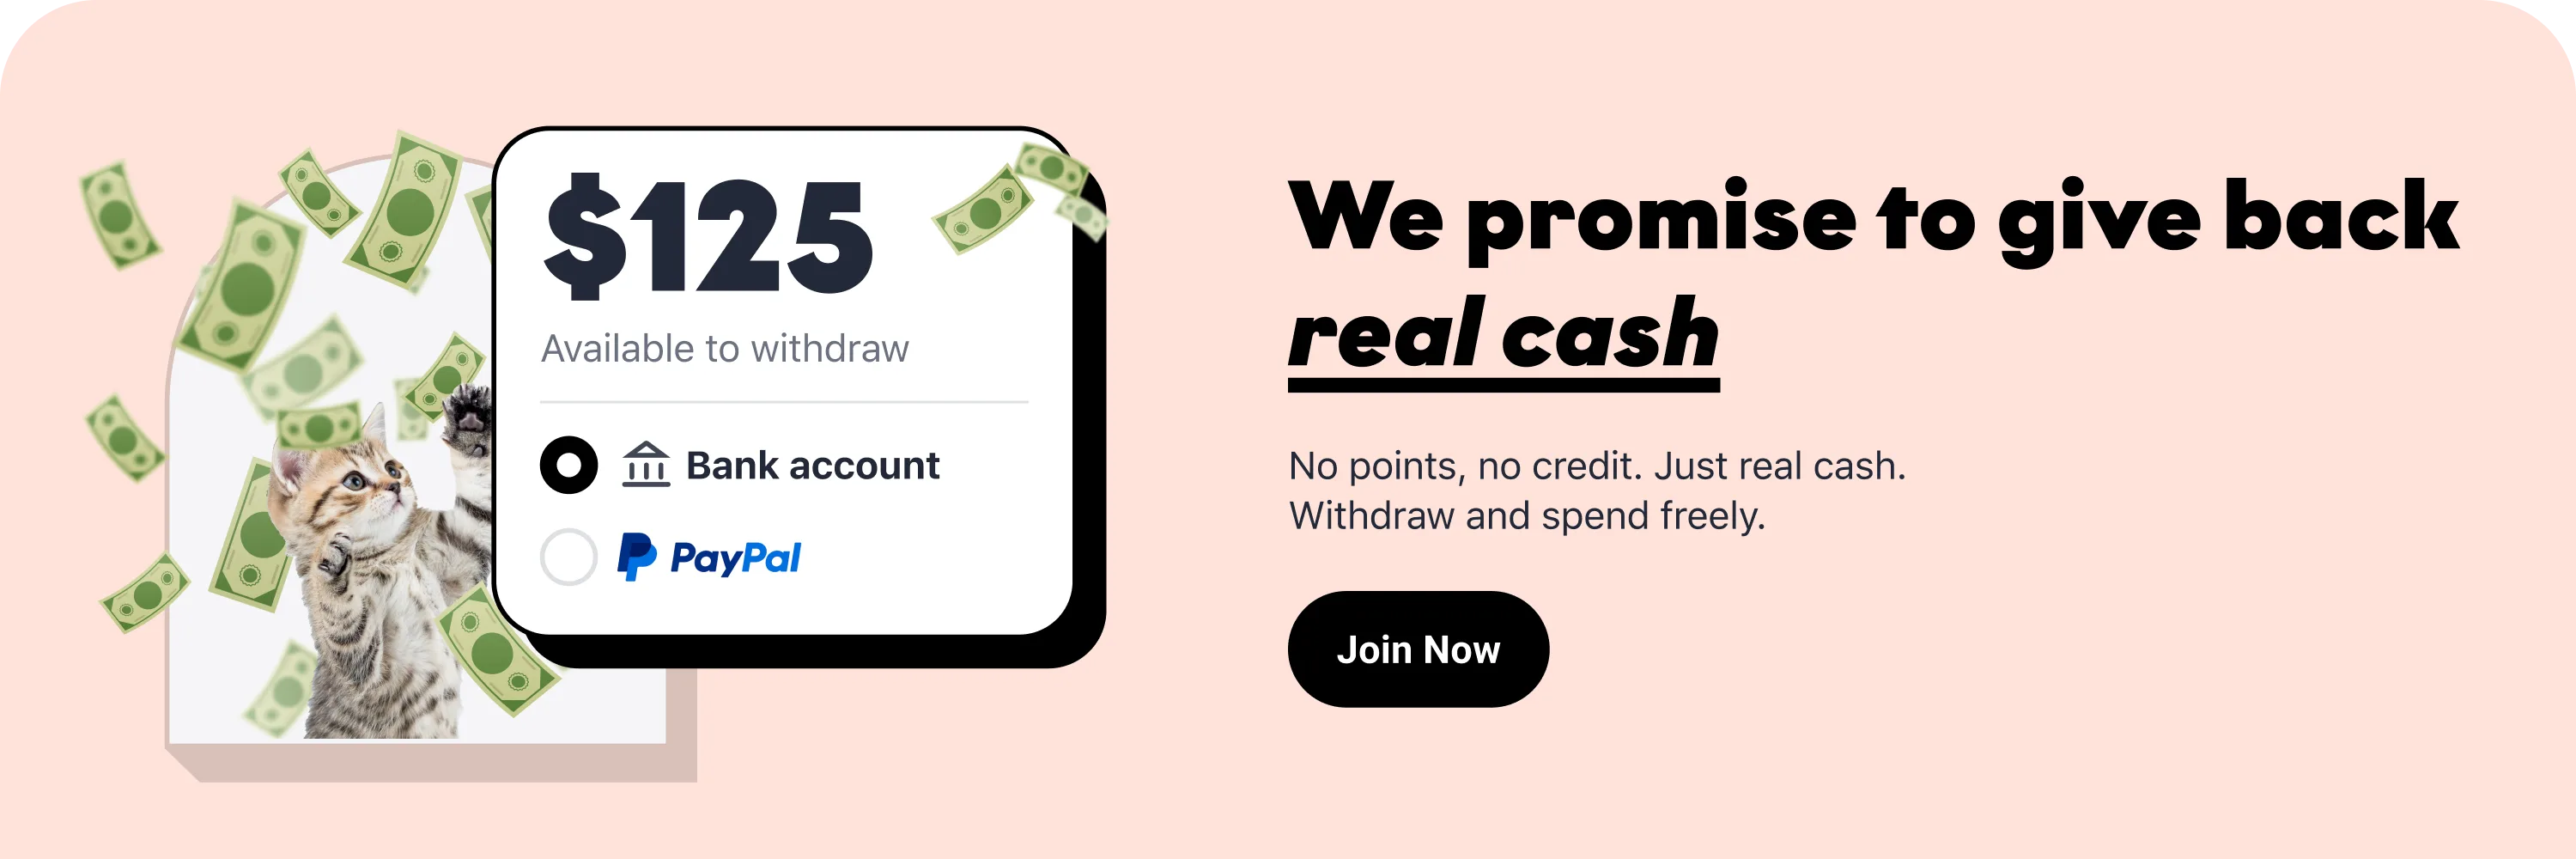 ShopBack gives you real cash. Withdraw and spend freely.